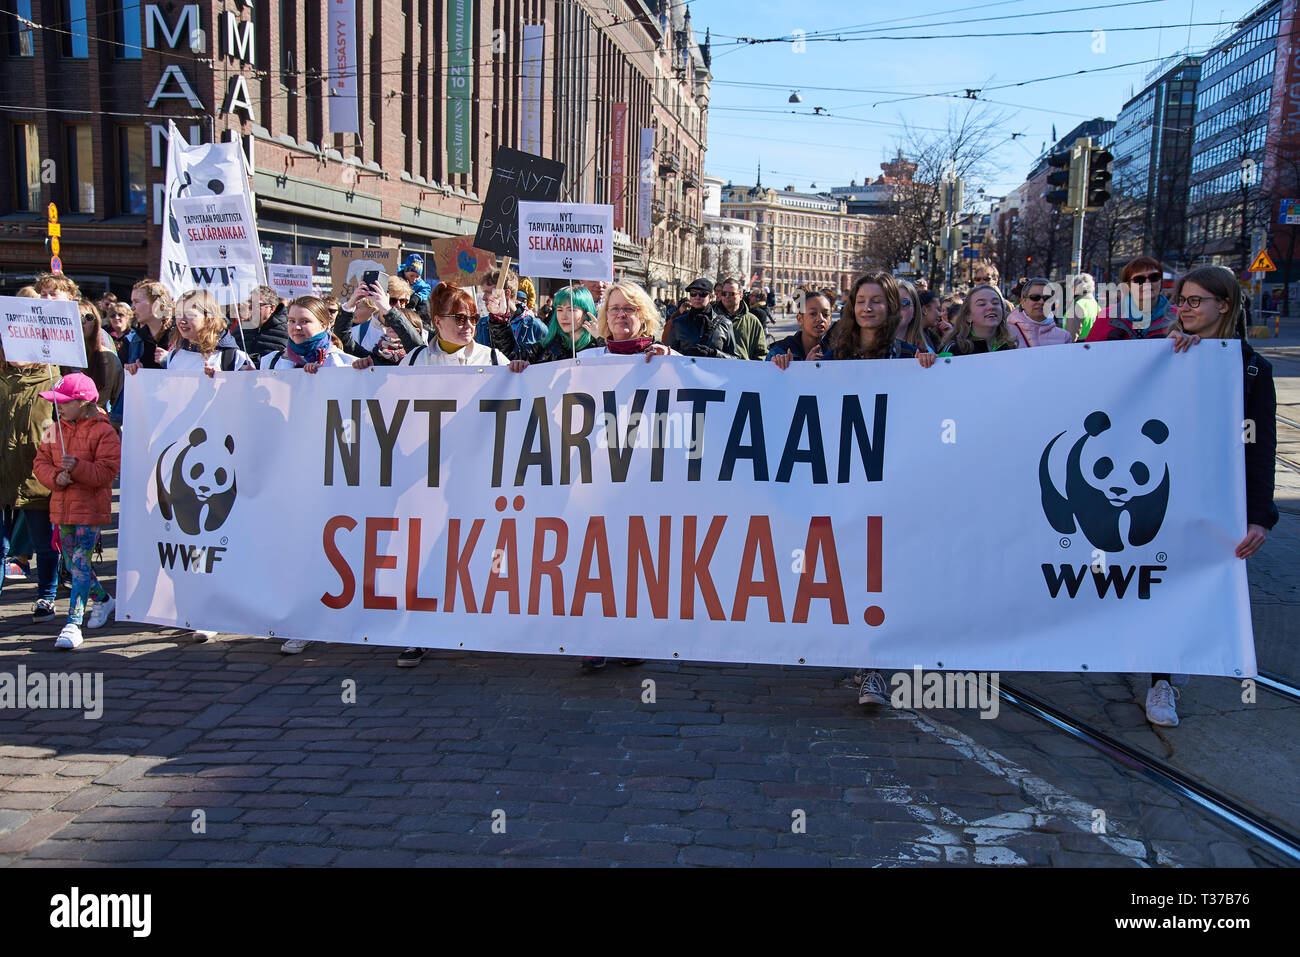 Helsinki, Finland - April 6, 2019: March and demonstration against climate change (Ilmastomarssi) in downtown Helsinki, Finland attended by more than  Stock Photo